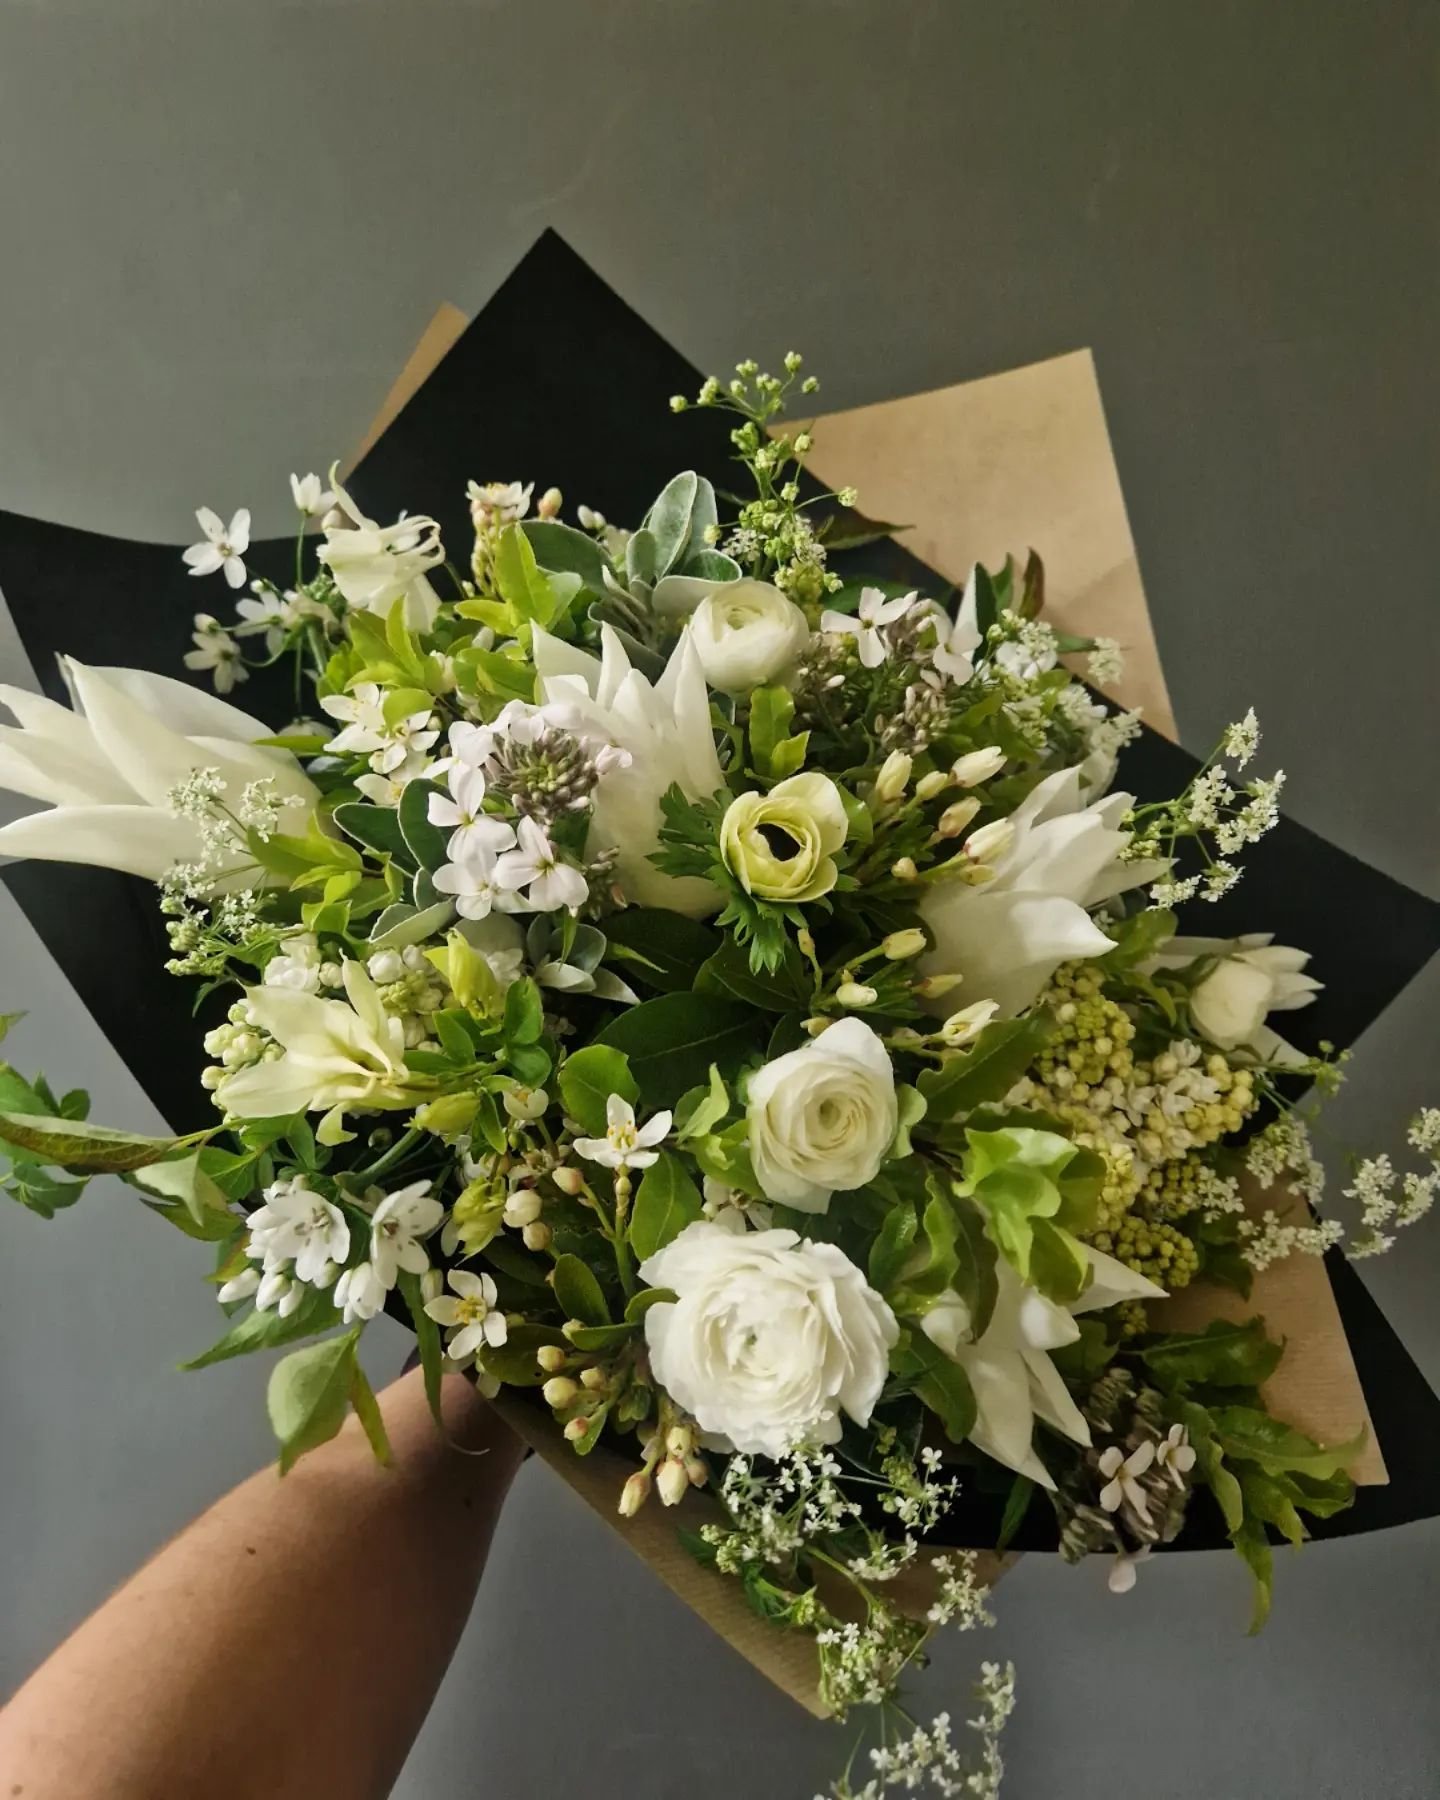 A bouquet of sympathy flowers delivered today. It's always nice to hear when a customer uses you instead of a well-known online flower seller.

When people send flowers, it's often to mark a significant event, and it's important the flowers are right